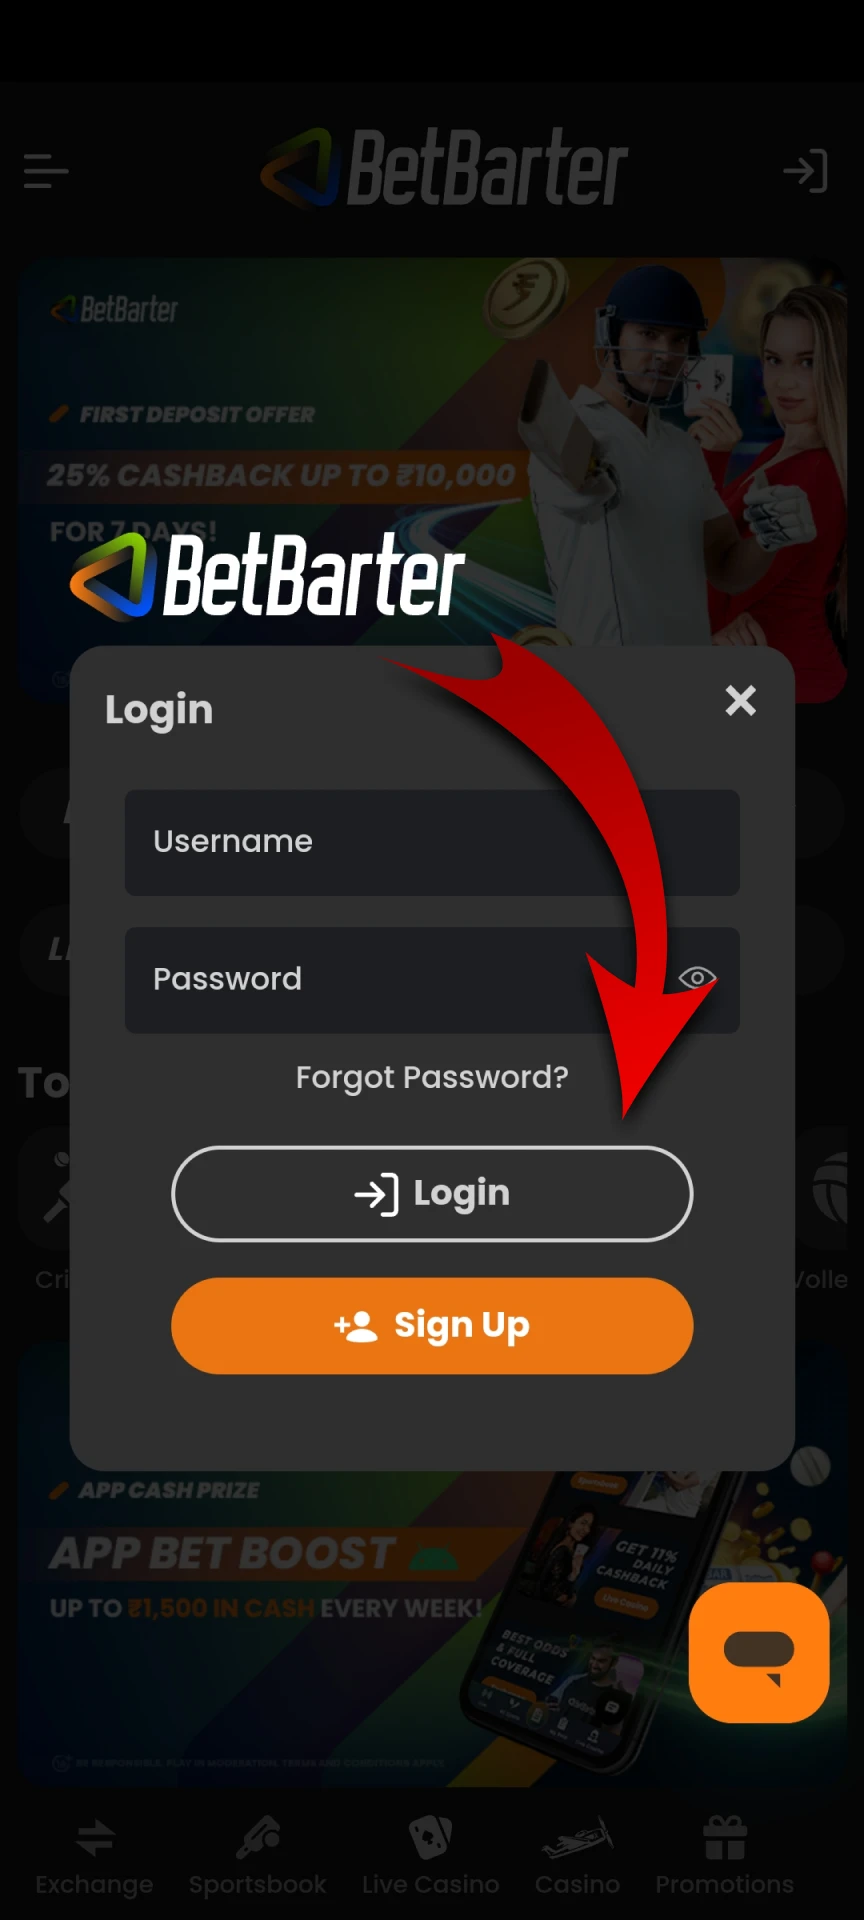 Log in to your BetBarter account to withdraw funds.